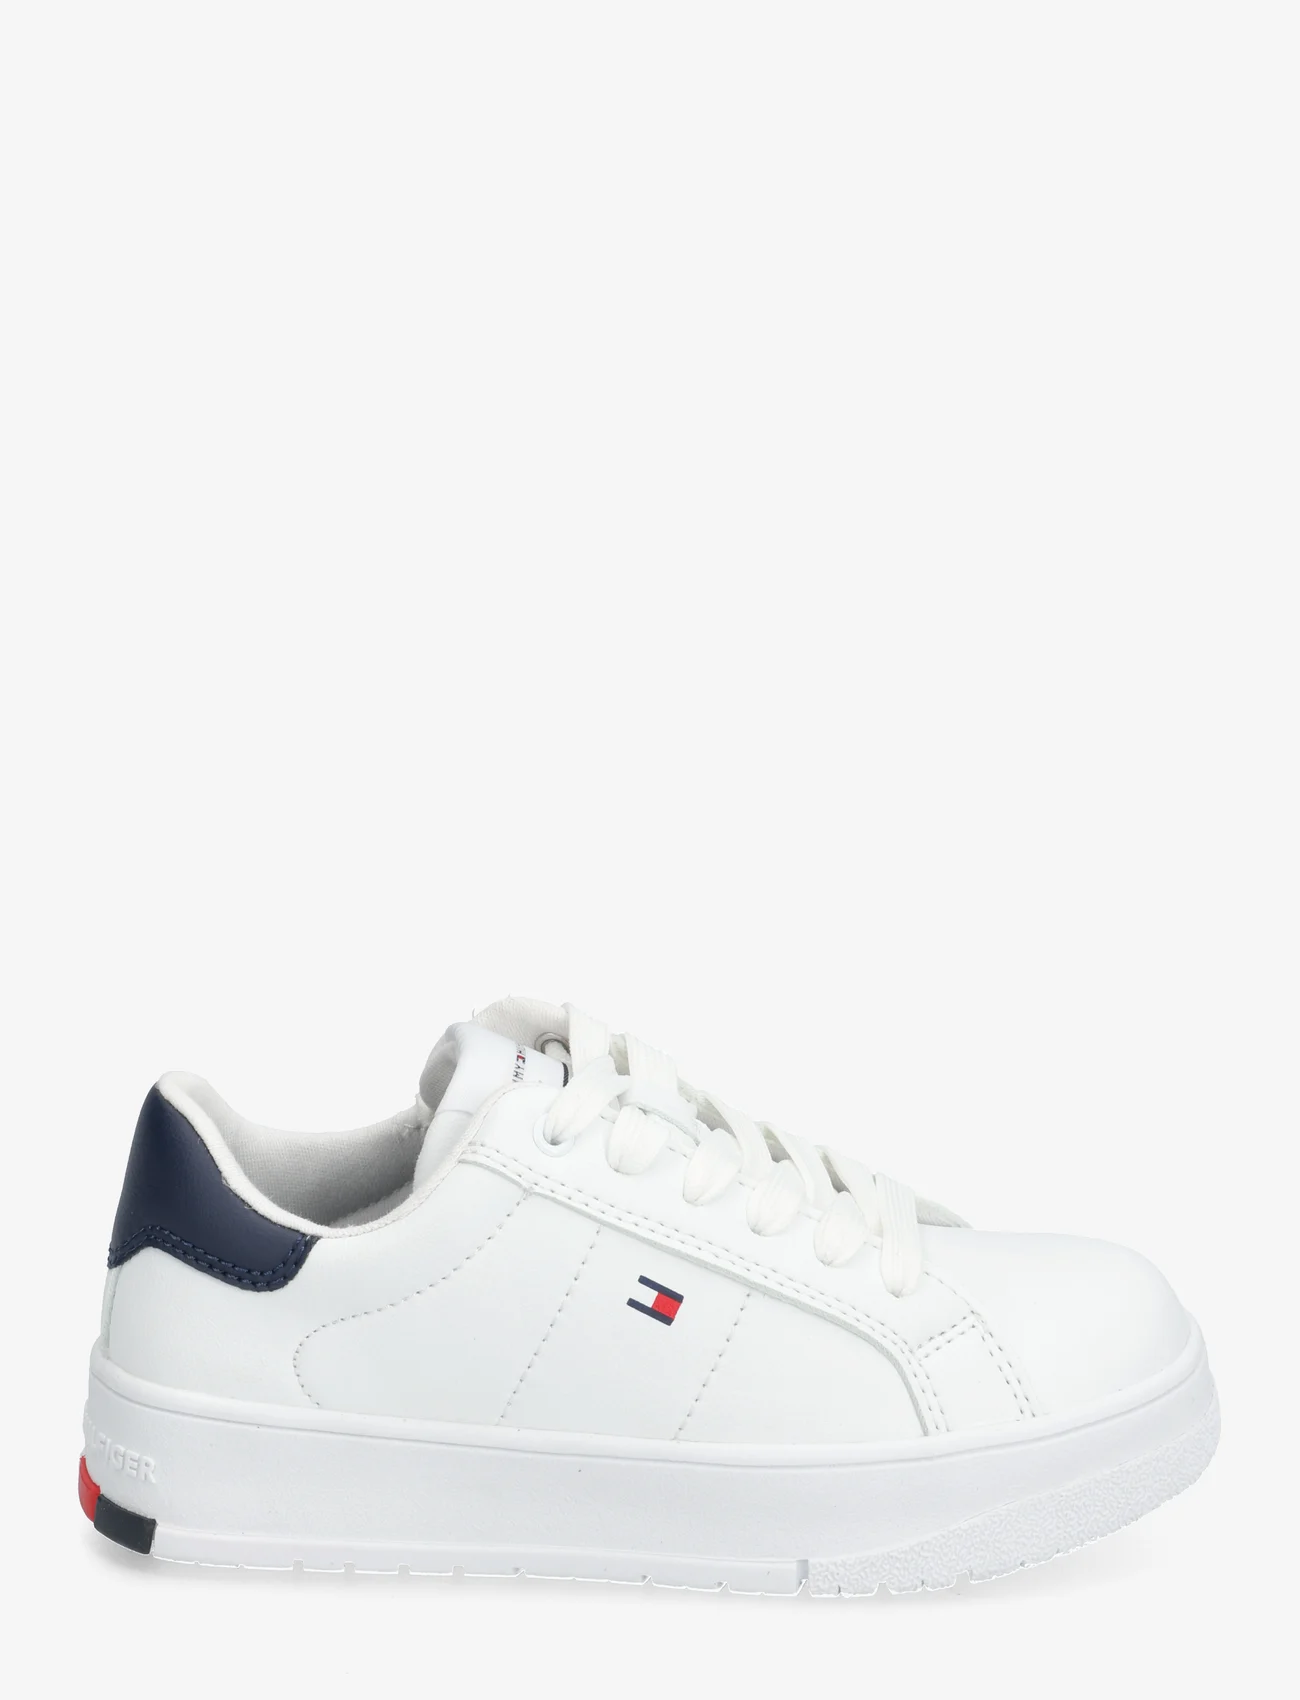 Tommy Hilfiger - LOW CUT LACE-UP SNEAKER - sommerschnäppchen - white/blue - 1